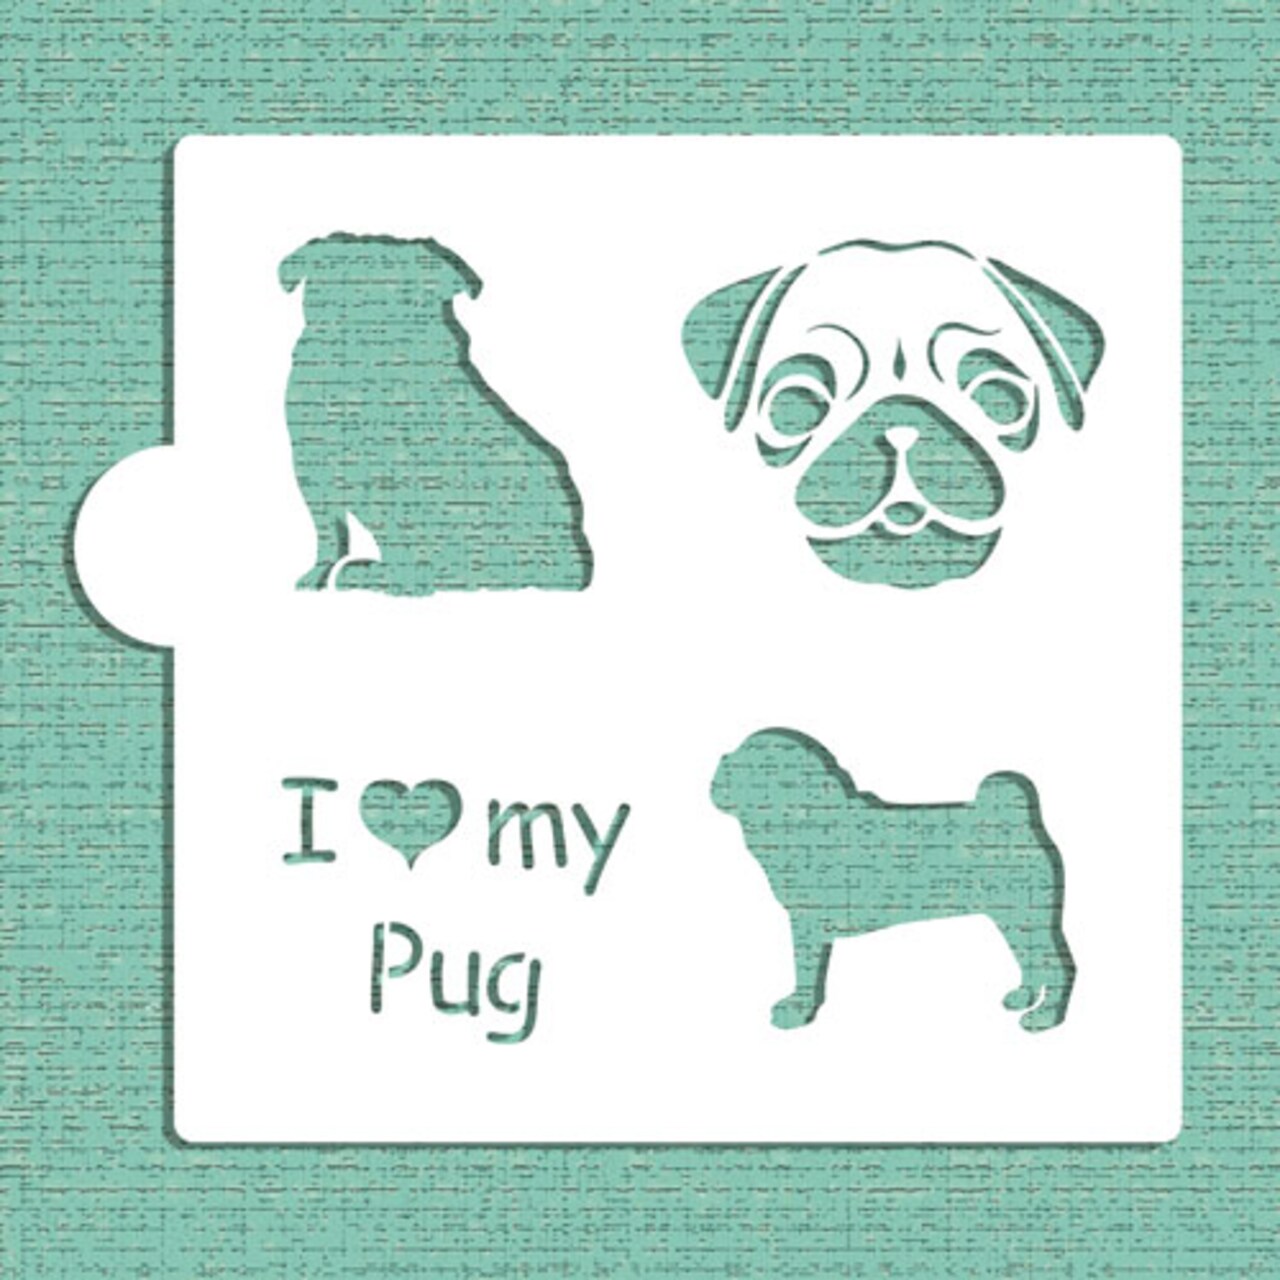 I Love My Pug Cookie &#x26; Craft Stencil | CM015 by Designer Stencils | Cookie Decorating Tools | Baking Stencils for Royal Icing, Airbrush, Dusting Powder | Craft Stencils for Canvas, Paper, Wood | Reusable Food Grade Stencil